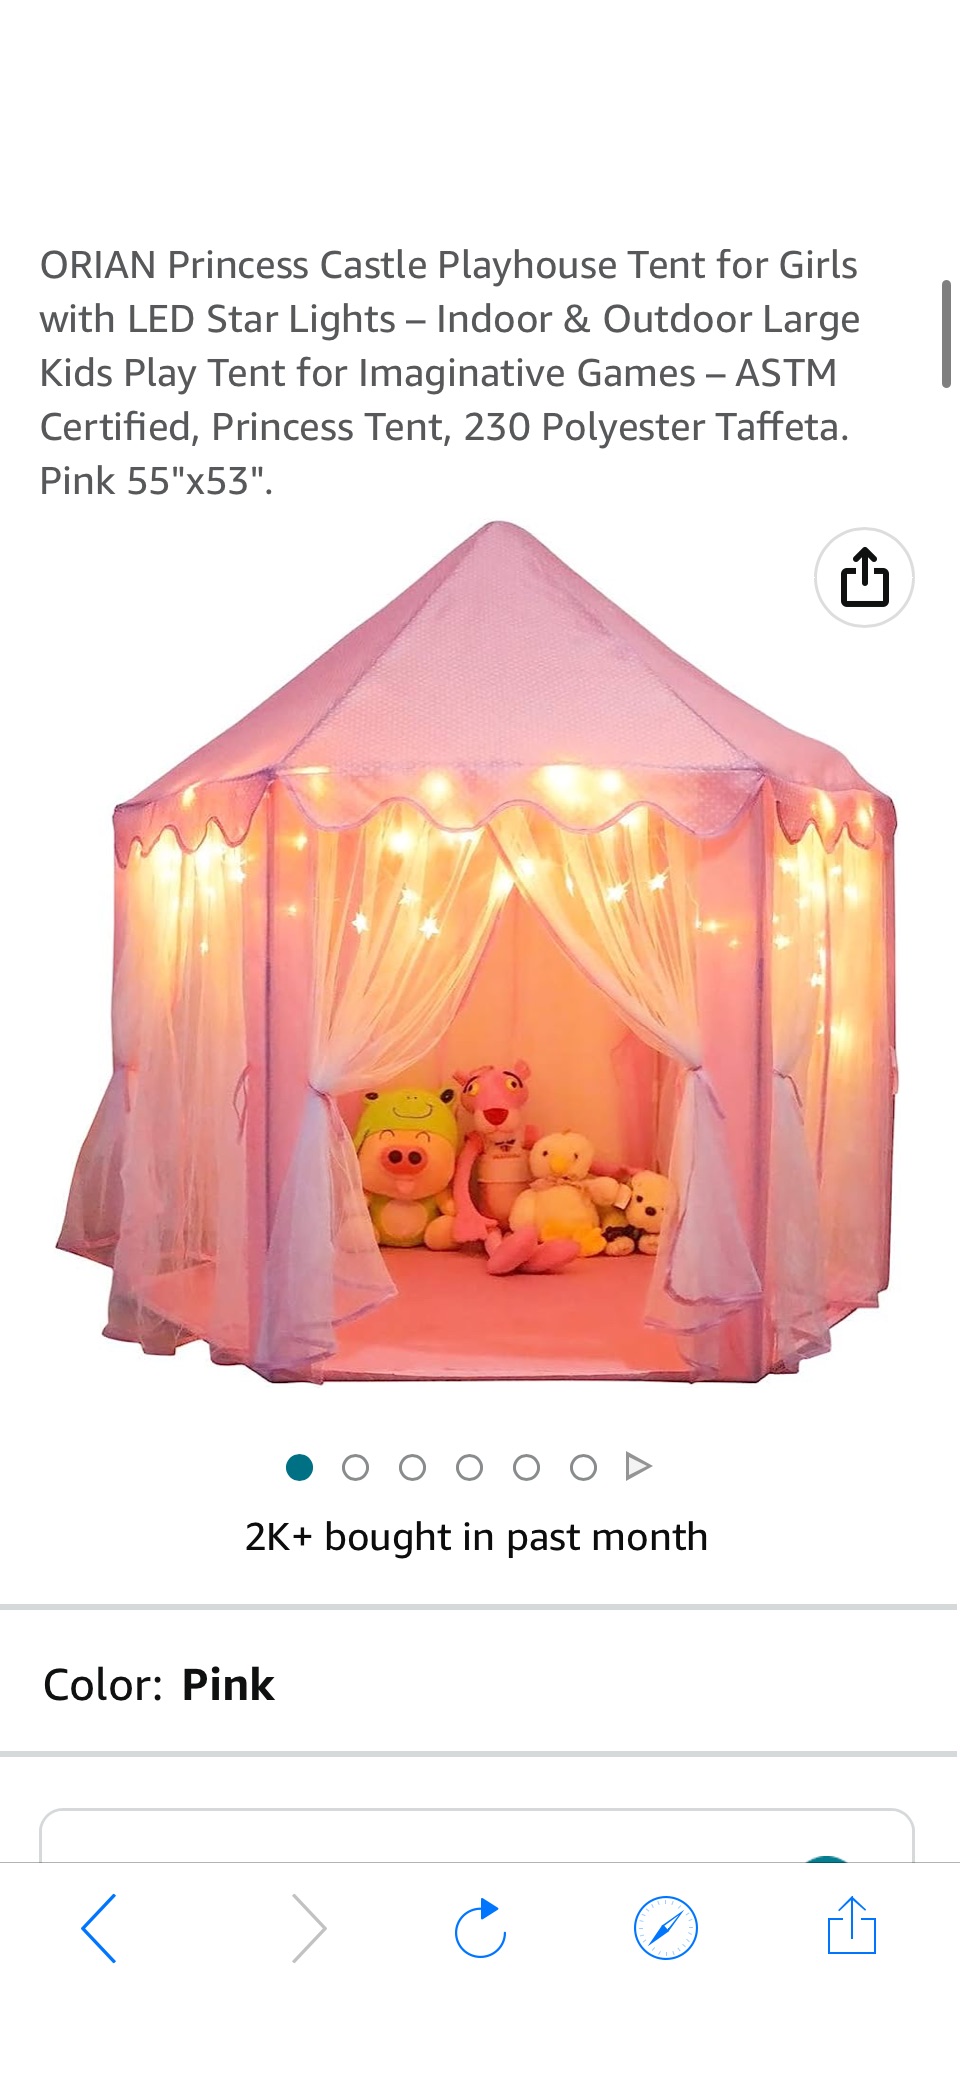 Amazon.com: ORIAN Princess Castle Playhouse Tent for Girls with LED Star Lights – Indoor & Outdoor Large Kids Play Tent for Imaginative原价59.99